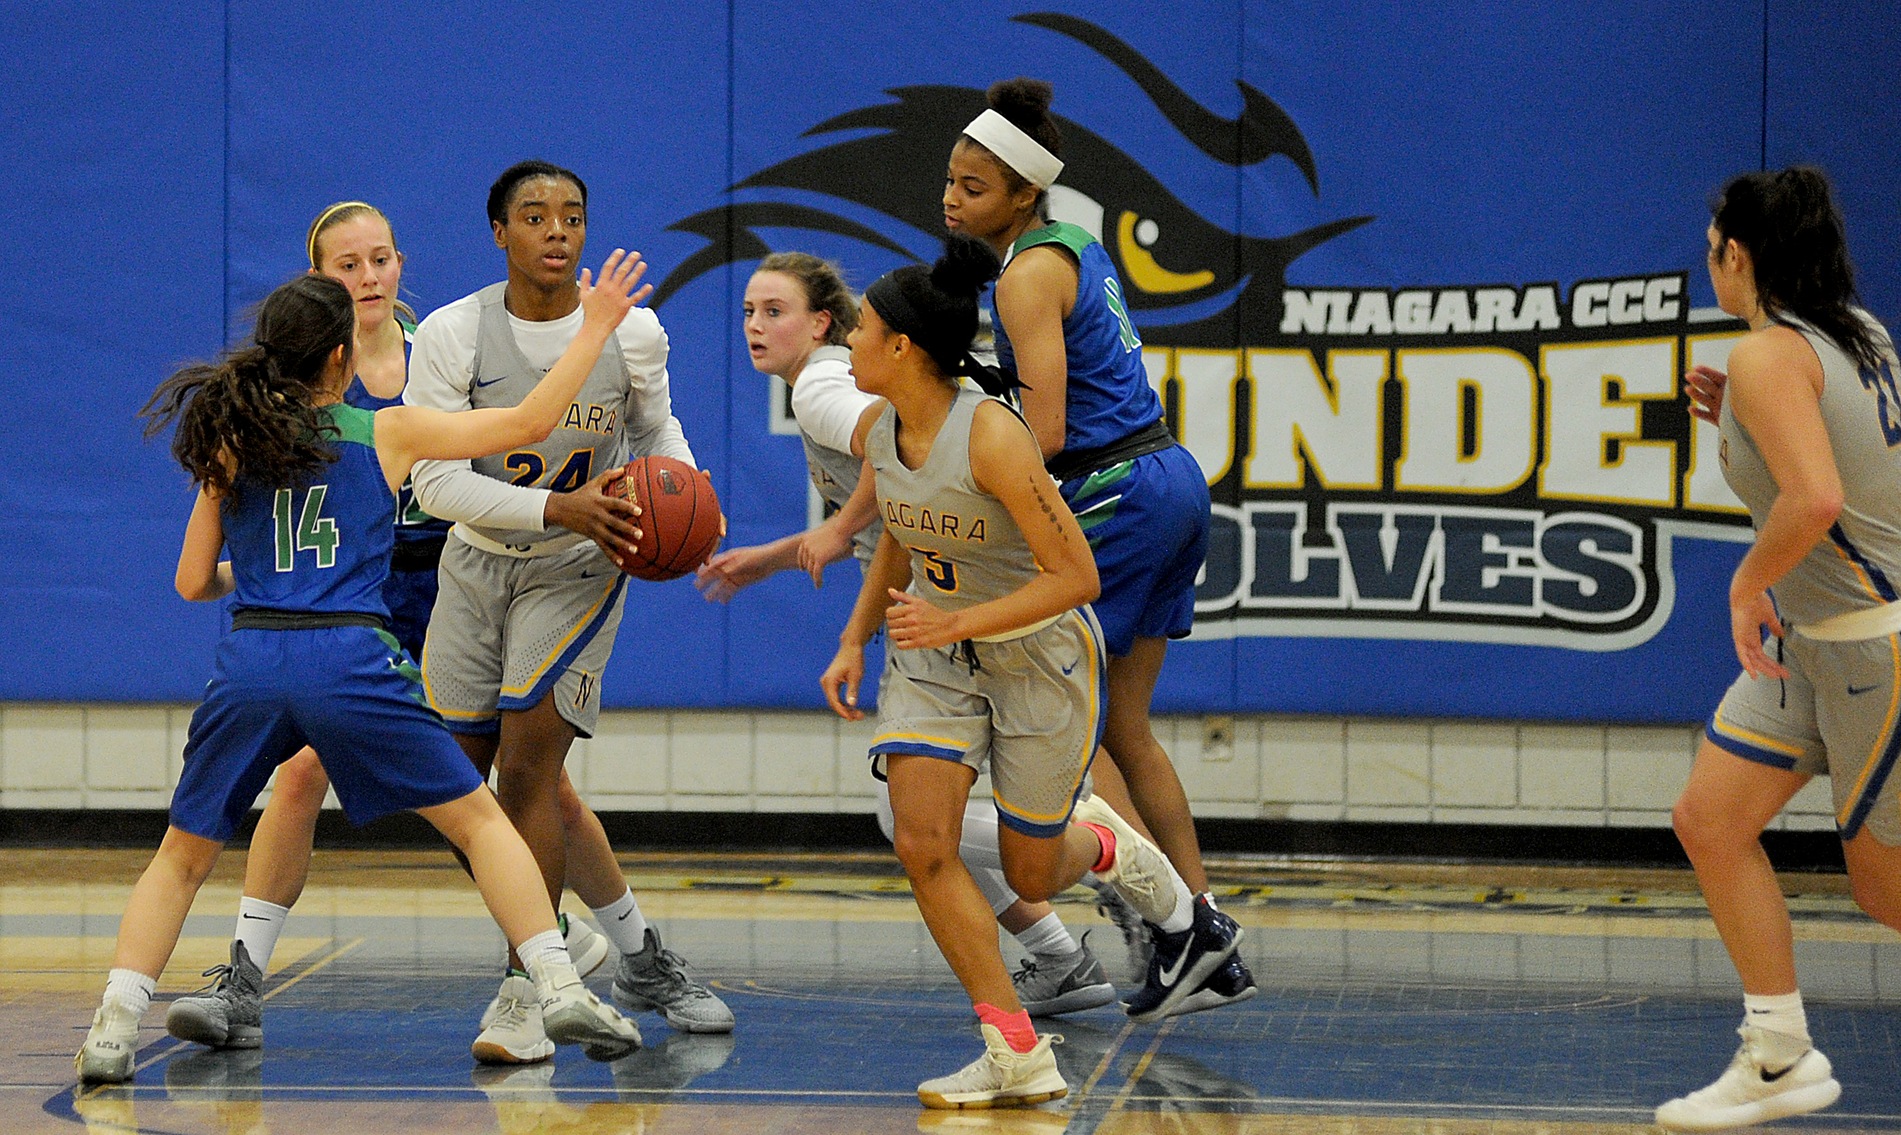 NCCC grinds out win vs. Cougars